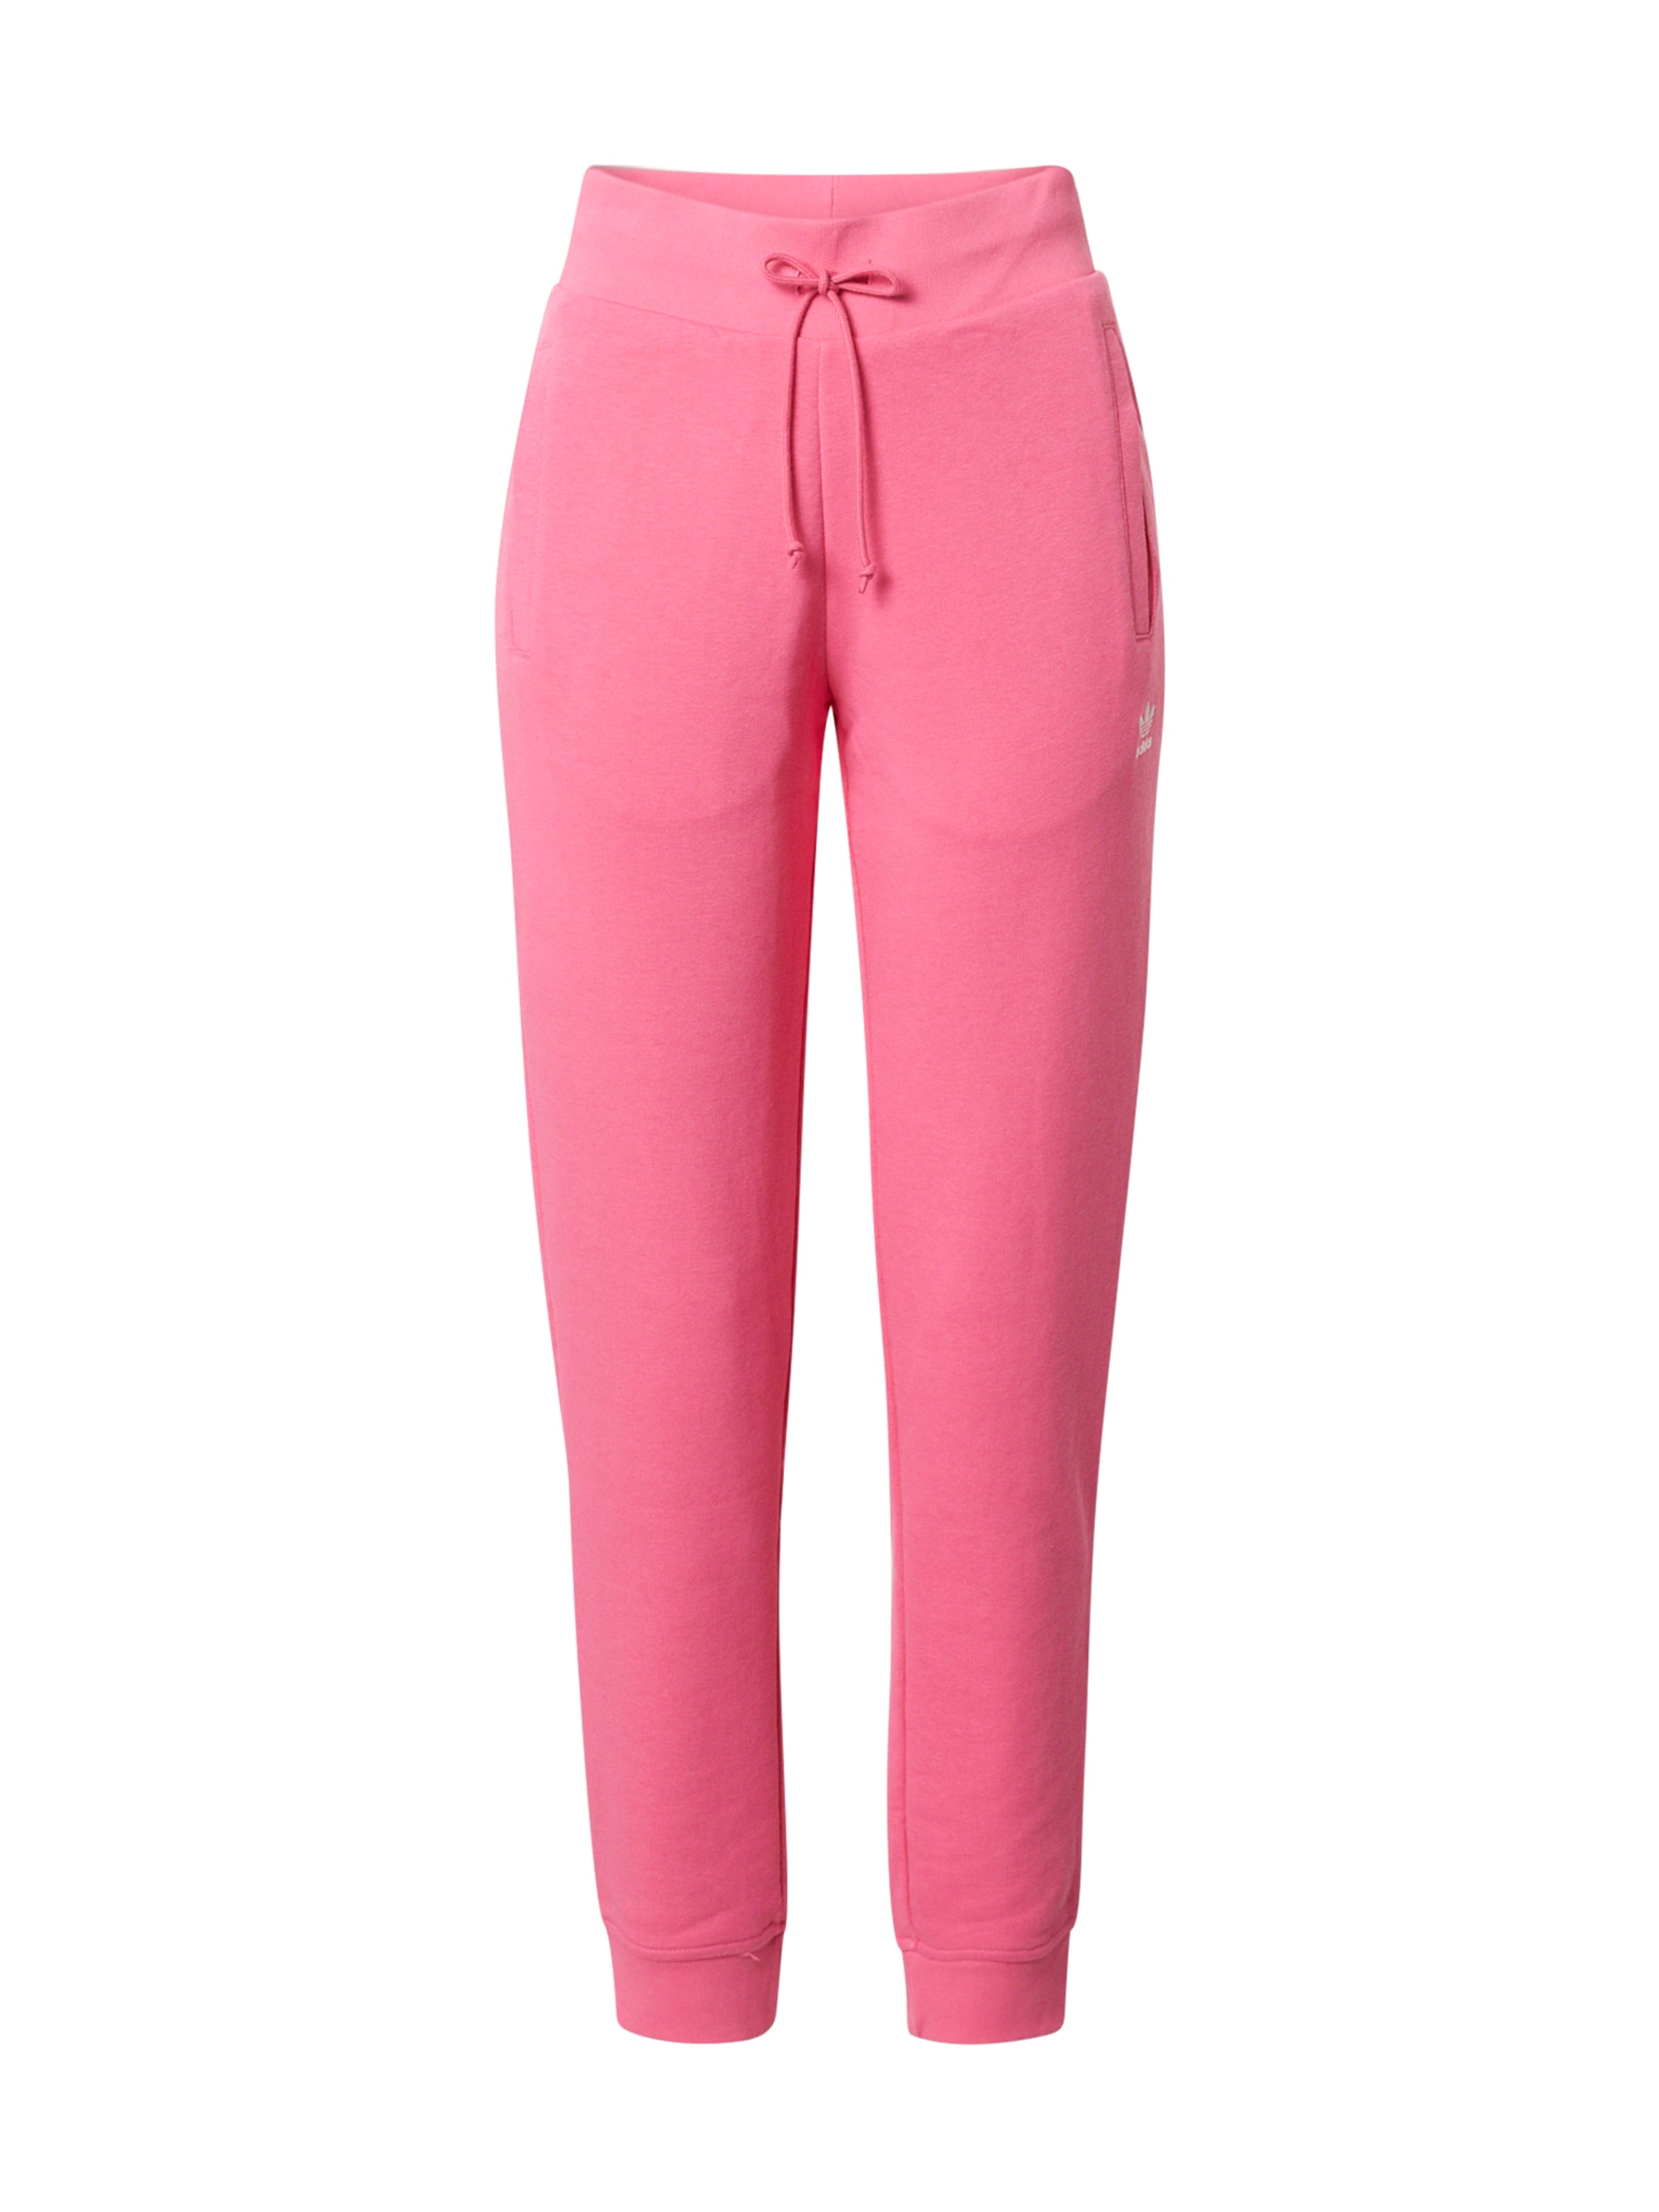 adidas pink trousers